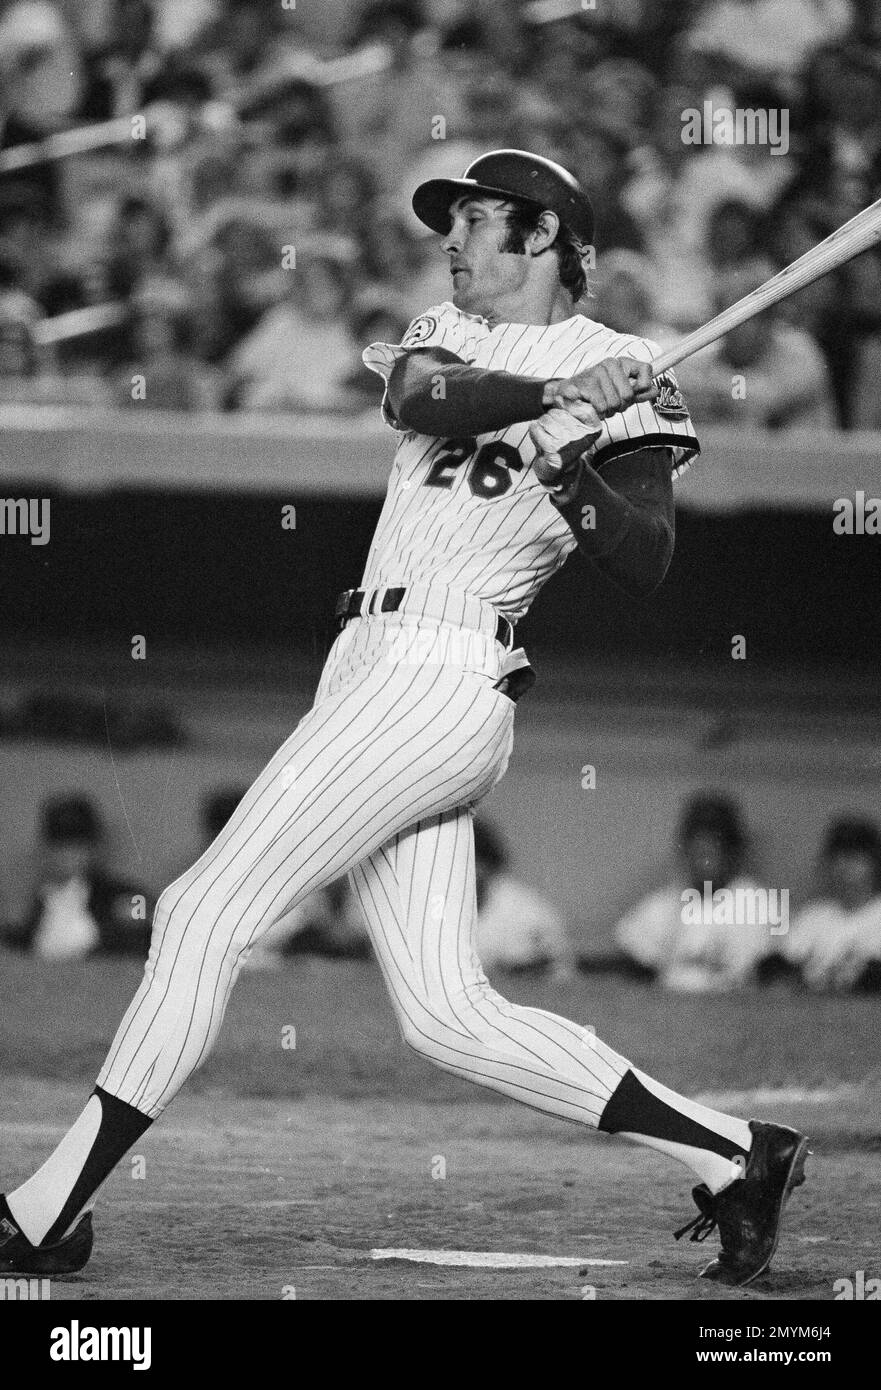 New York Mets' Dave Kingman takes a big swing at the ball during a game  with the St. Louis Cardinals, June 30, 1976, at Shea Stadium in New York.  Kingman connected with